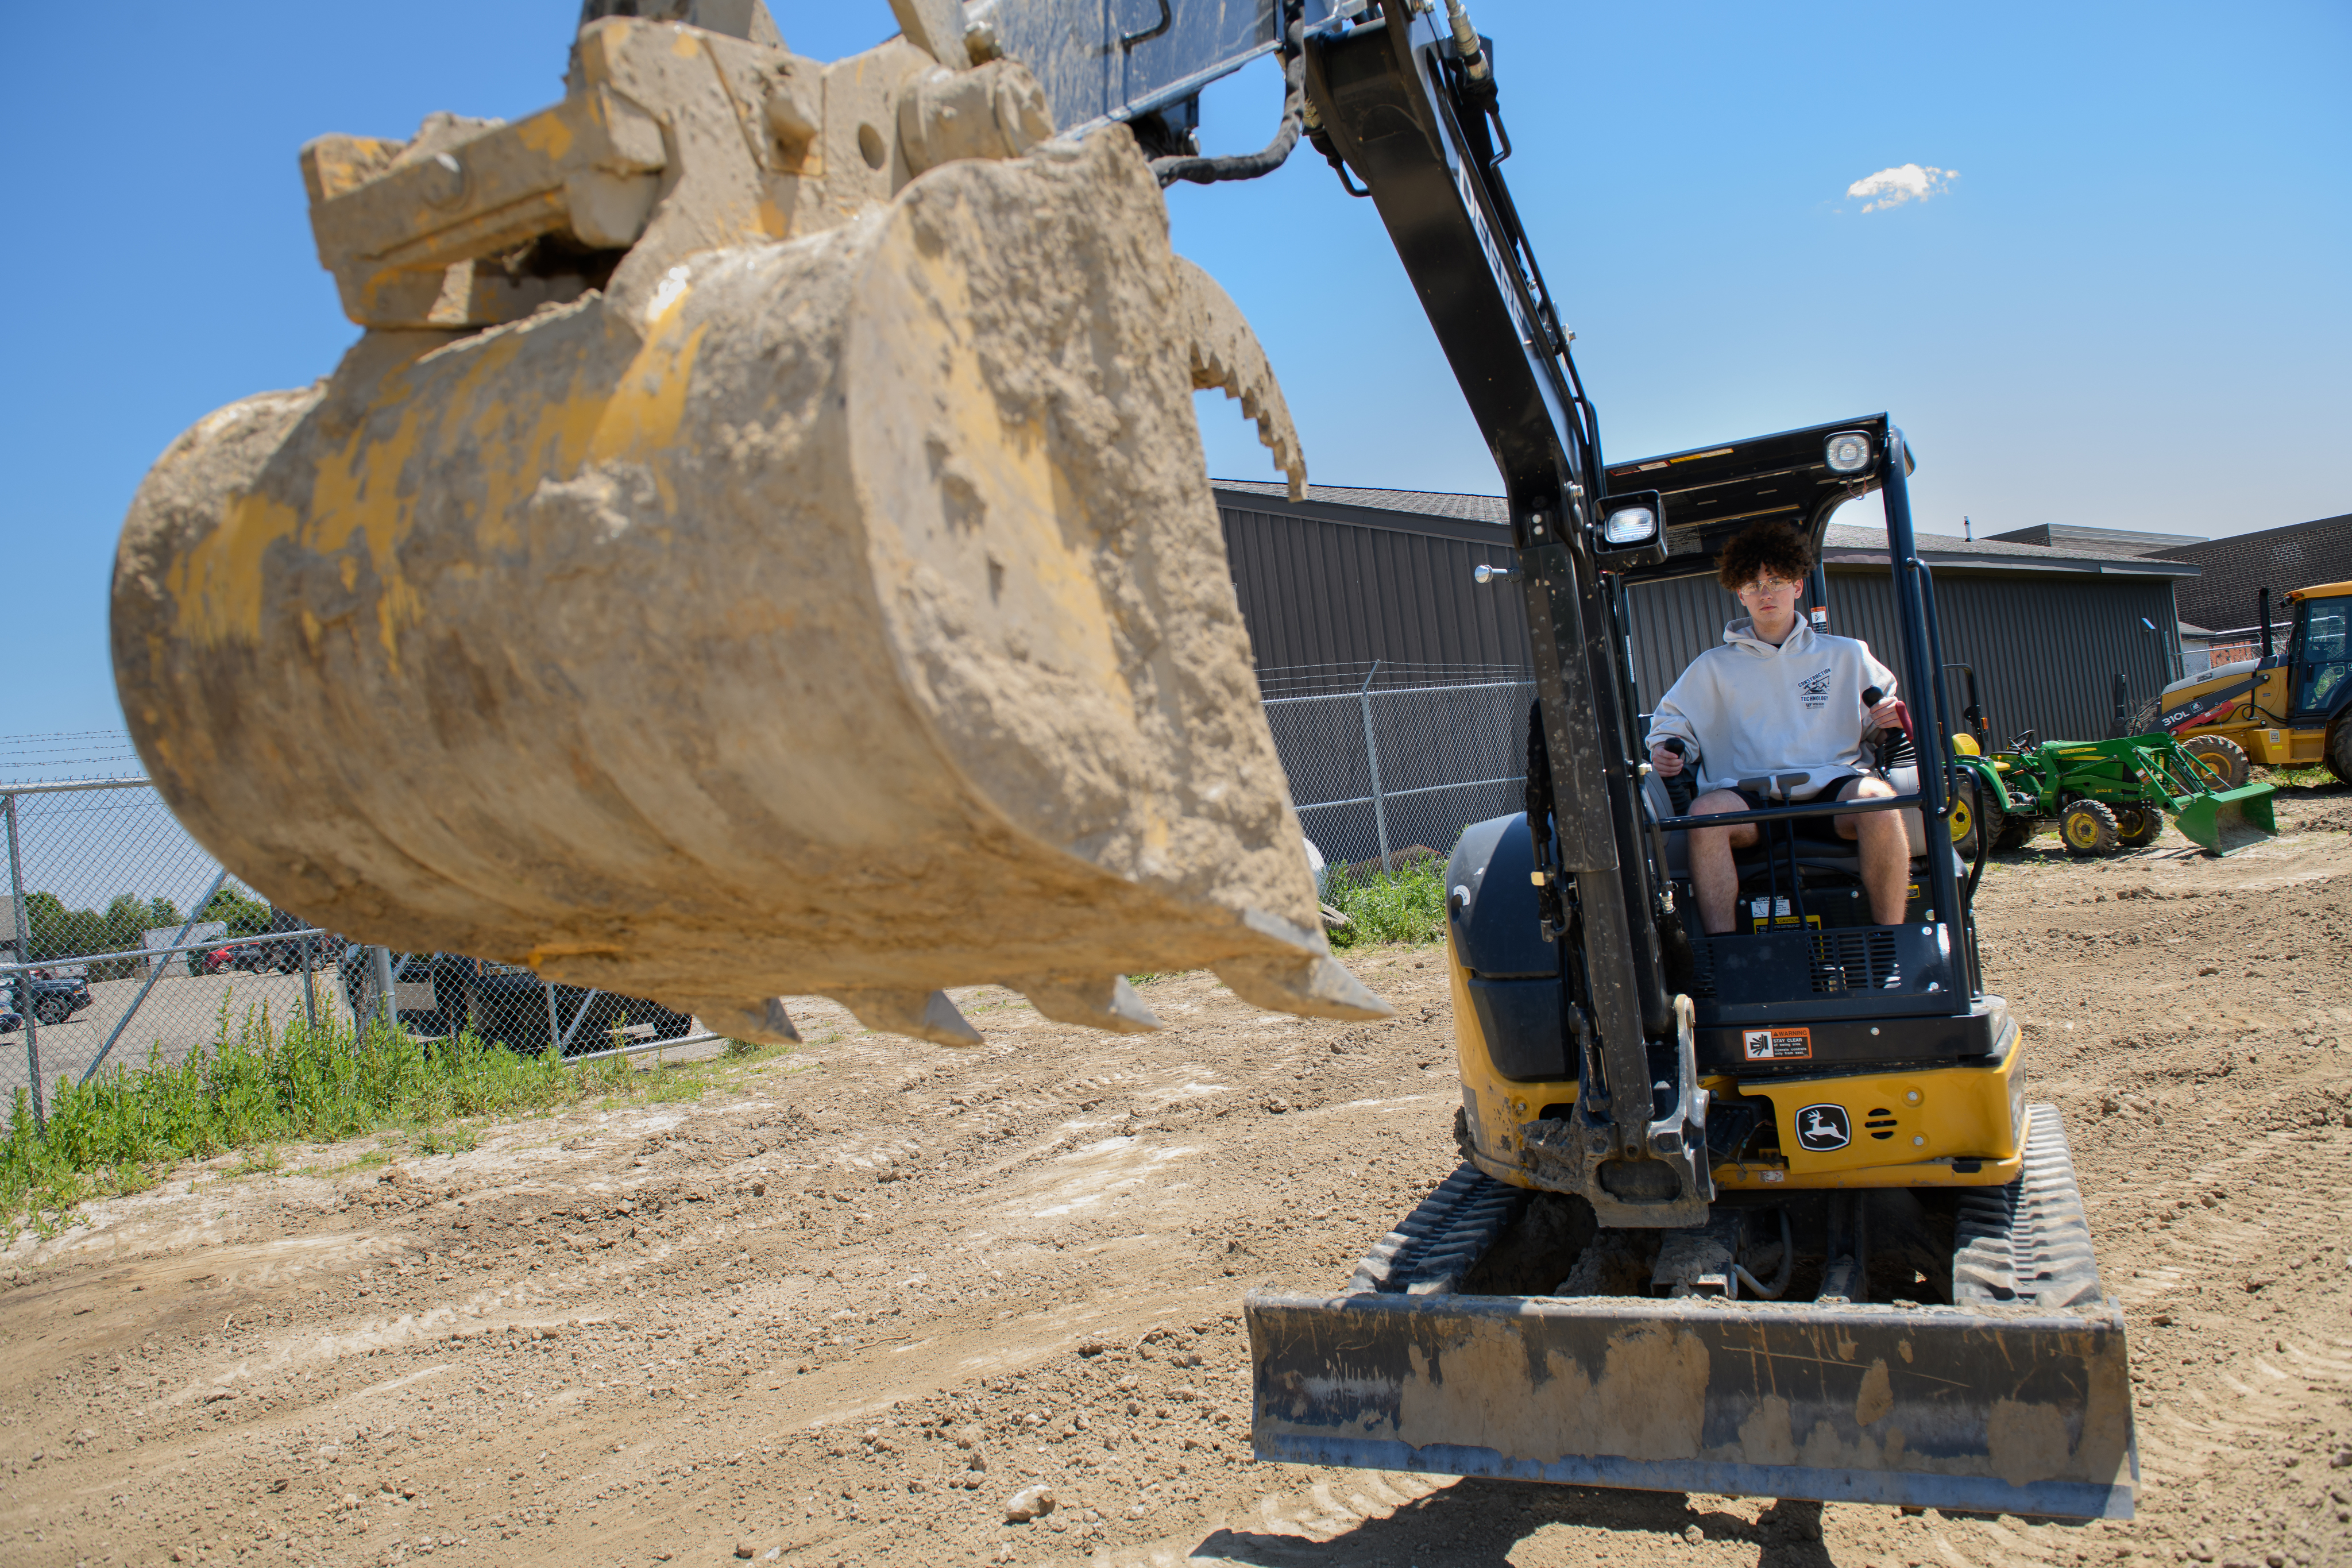 Male construction student sitting in the bulldozer ready to dig up some dirt.